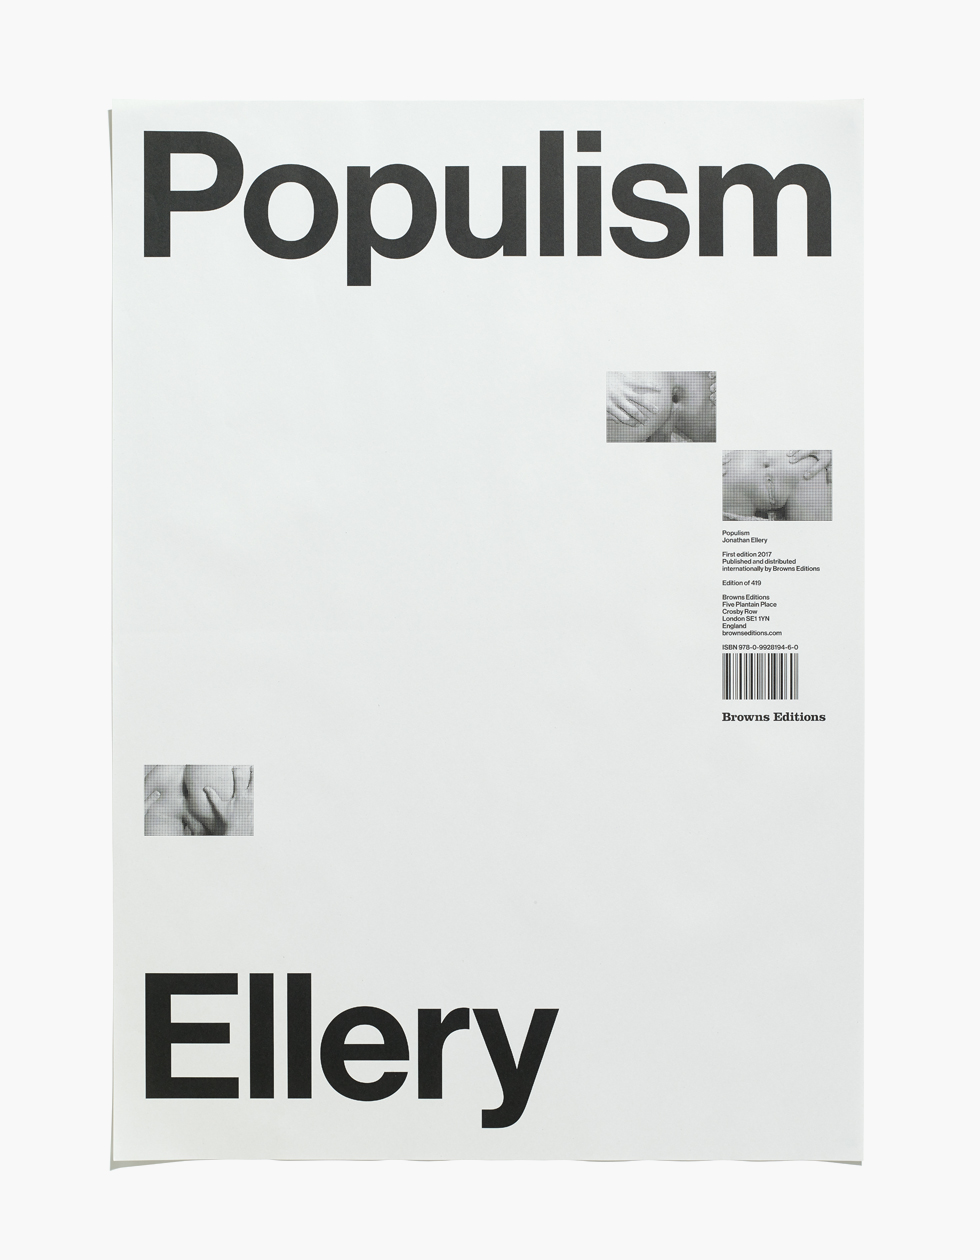 Populism Poster, Jonathan Ellery, Browns Editions and Browns Design, 2017